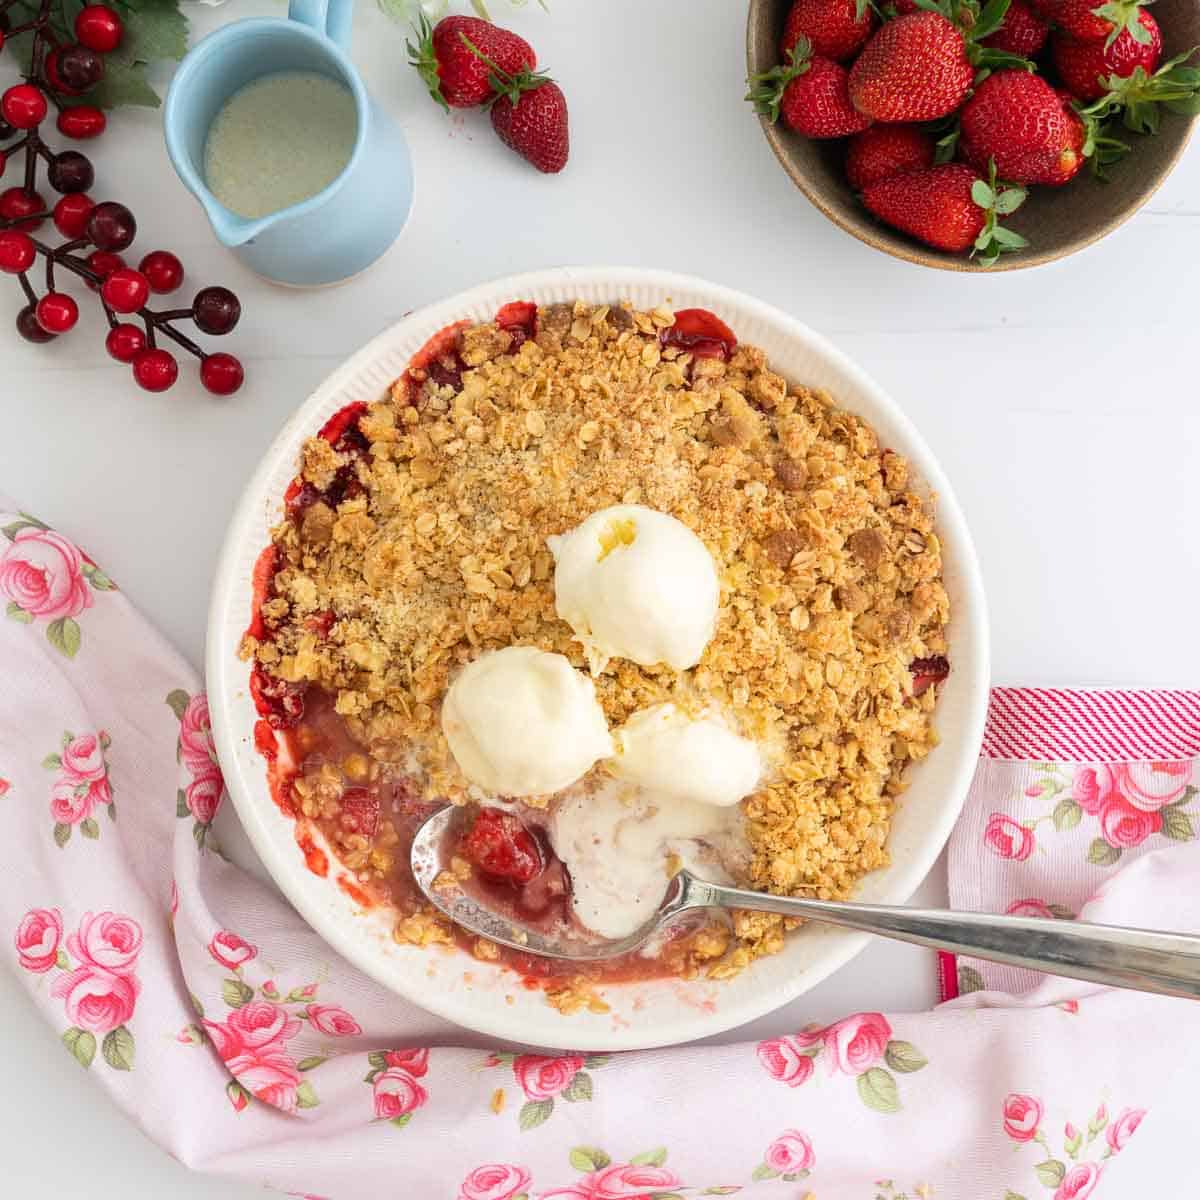 Image of a strawberry crumble, serving spoon and ice cream, strawberry syrup visible under the crumble topping.